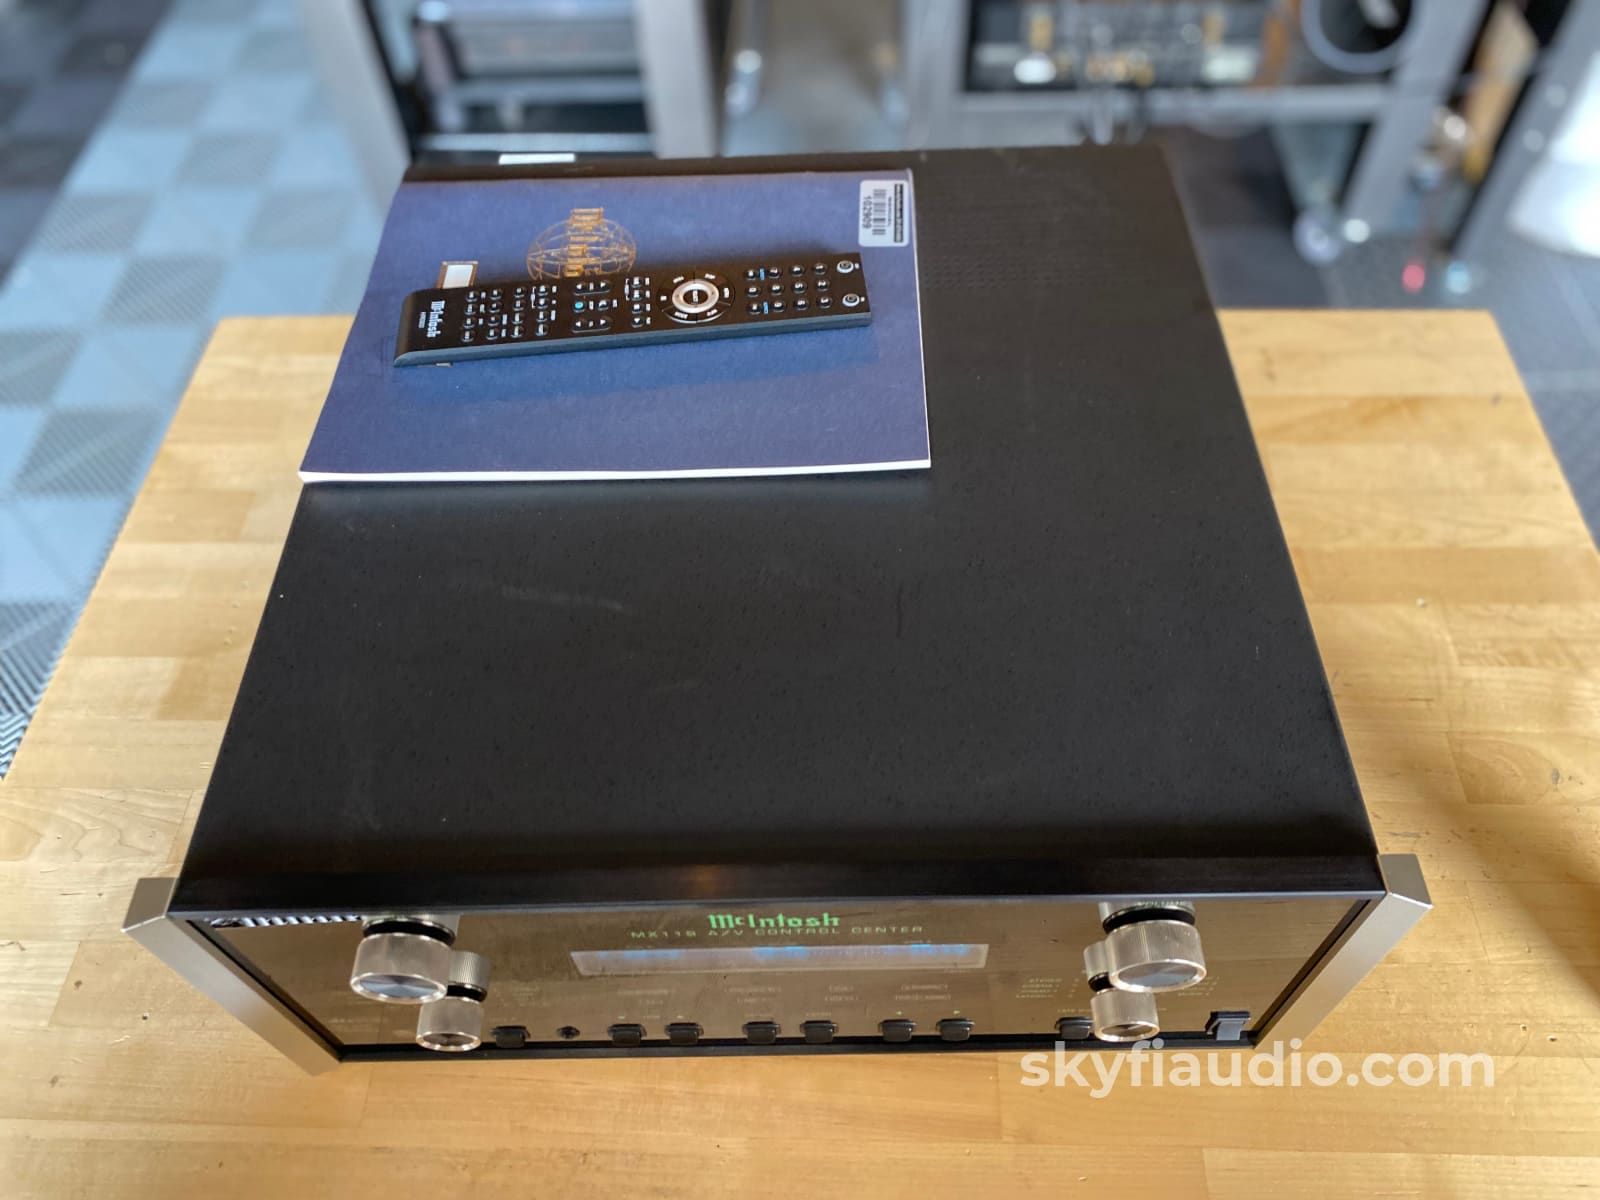 Mcintosh Mx119 Home Theater Processor And Preamplifier